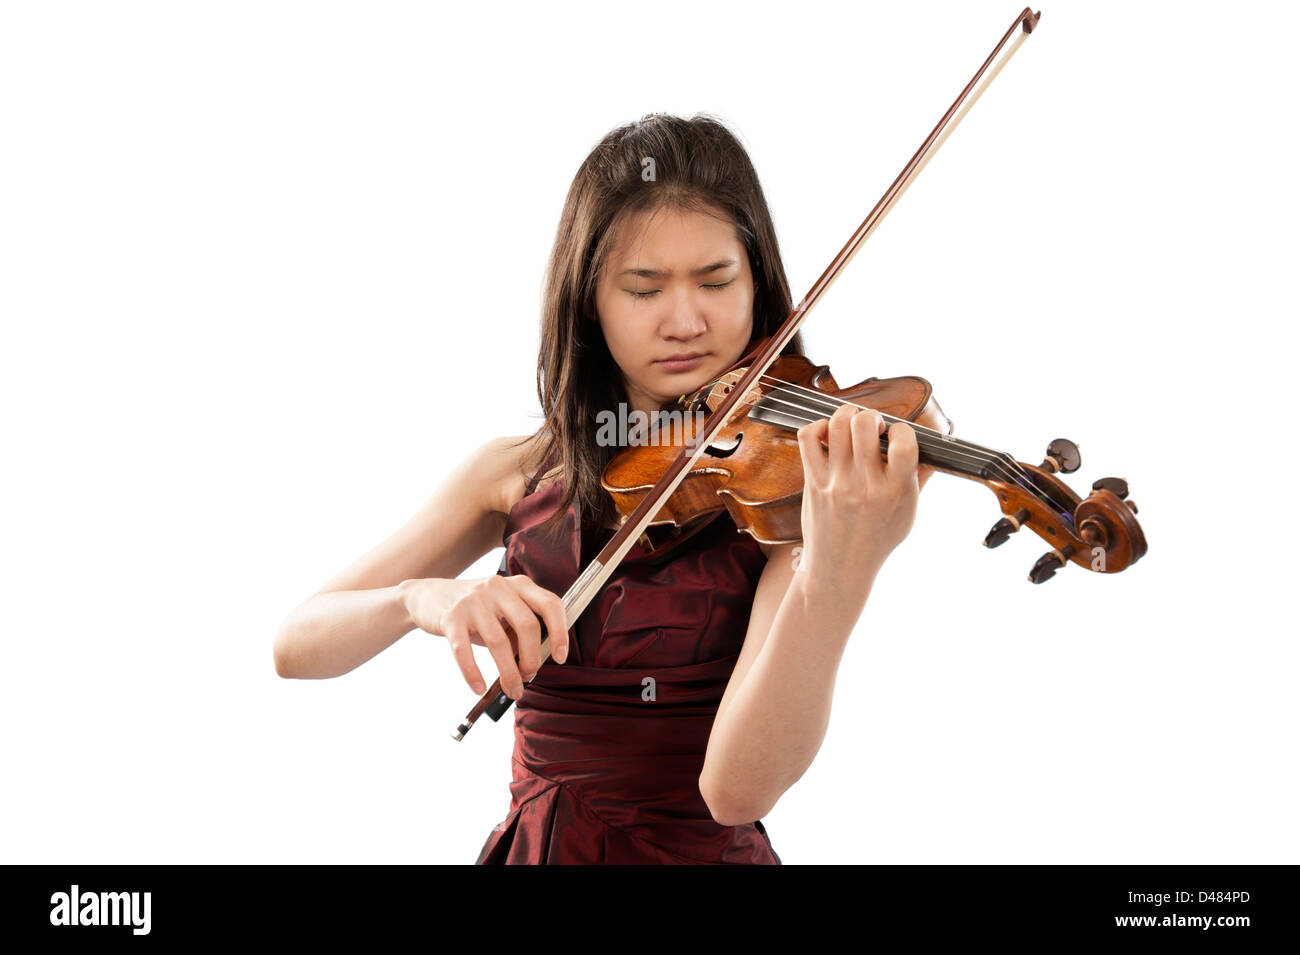 young violin player Stock Photo - Alamy